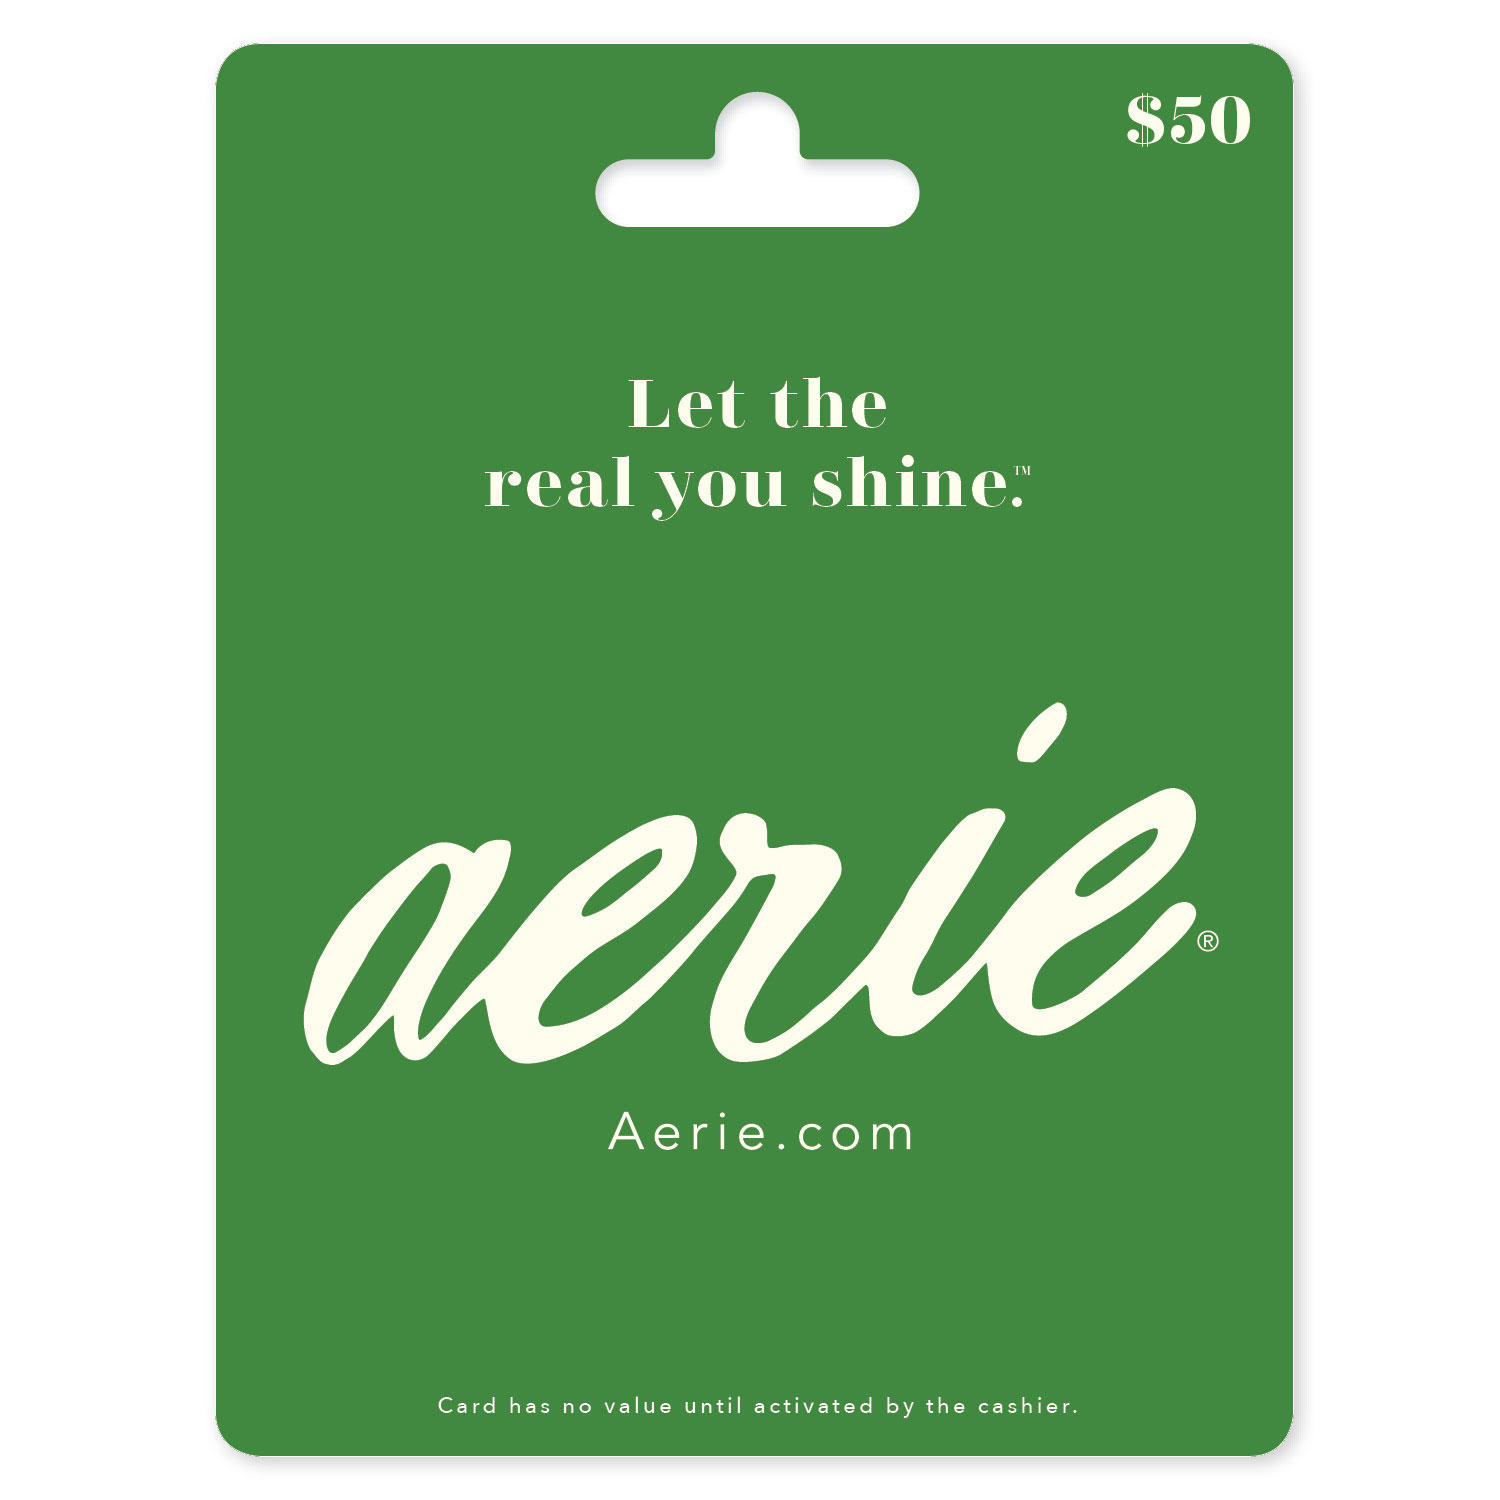 Aerie by American Eagle $50 Value Gift Card